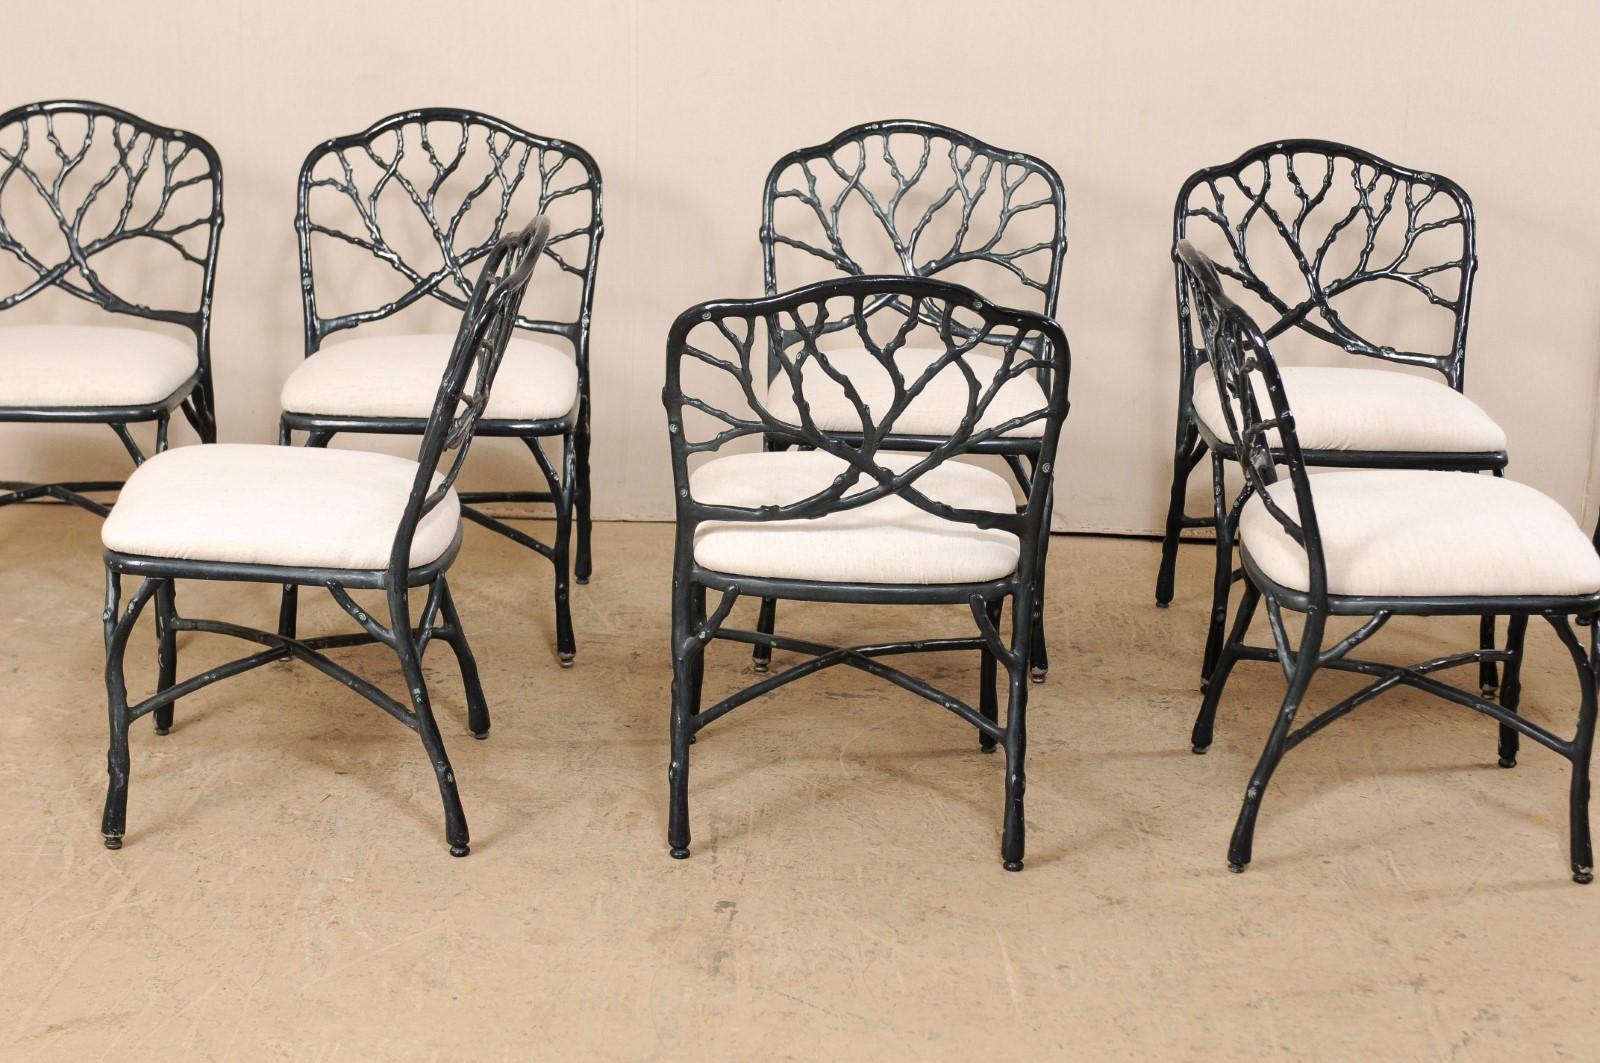 20th Century Whimsical Set of Eight Twig & Branch Motif Vintage American Patio Dining Chairs